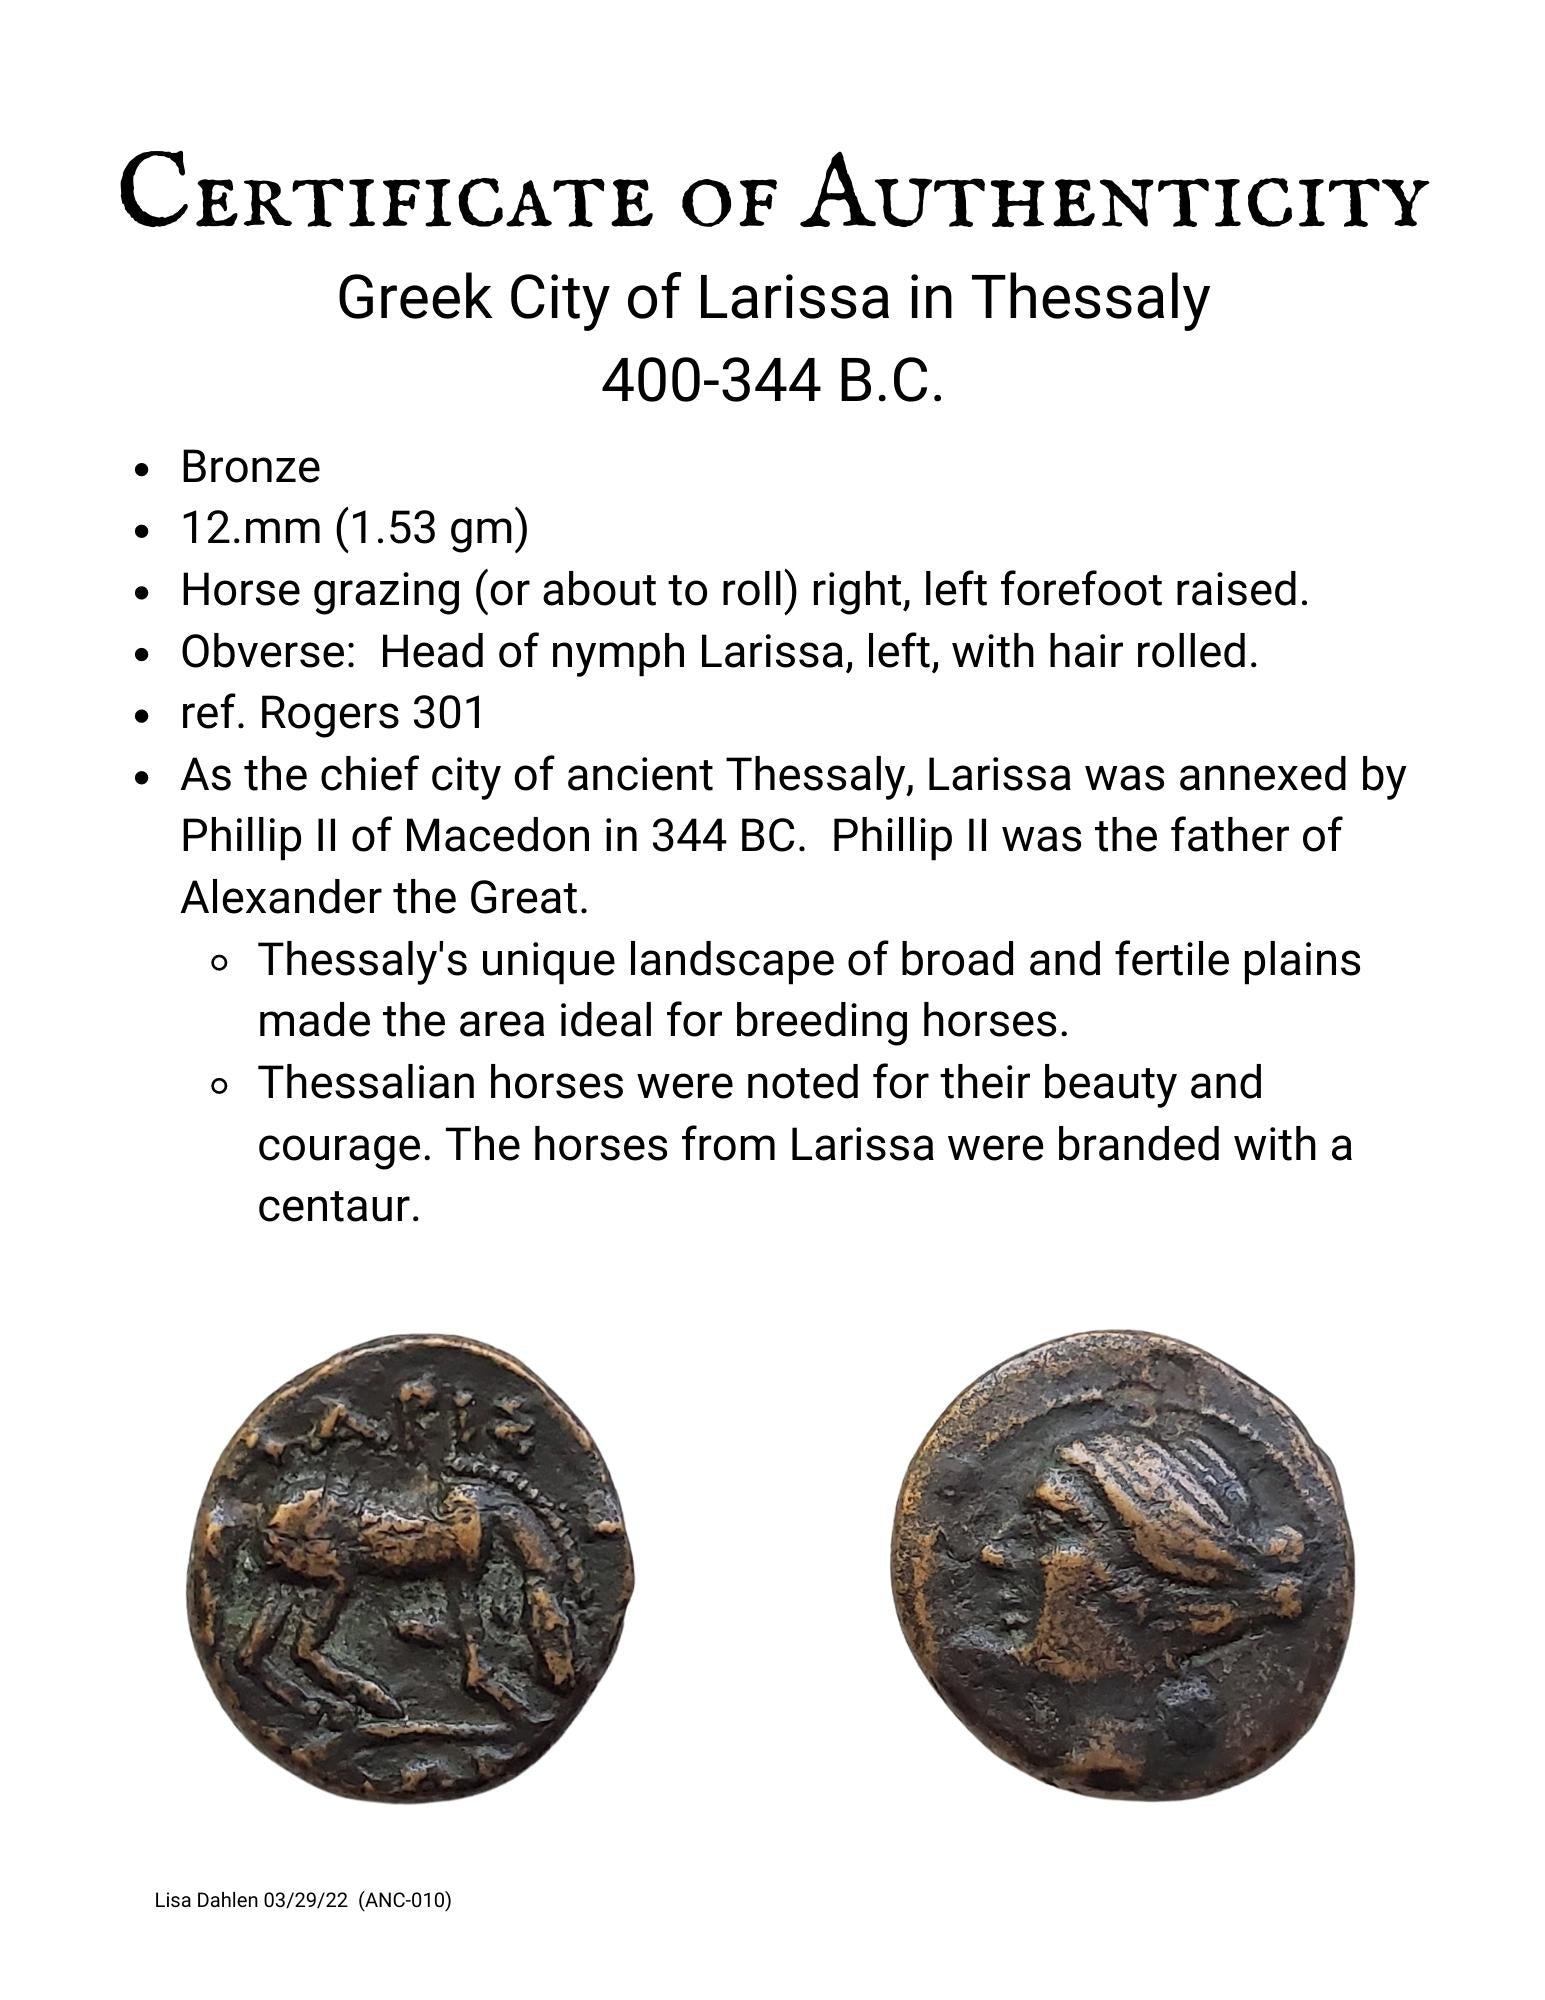 Certificate of authenticity of ancient Greek bronze coin from Thessaly, Larissa of a Horse with the nymph Larissa  400-344 BC